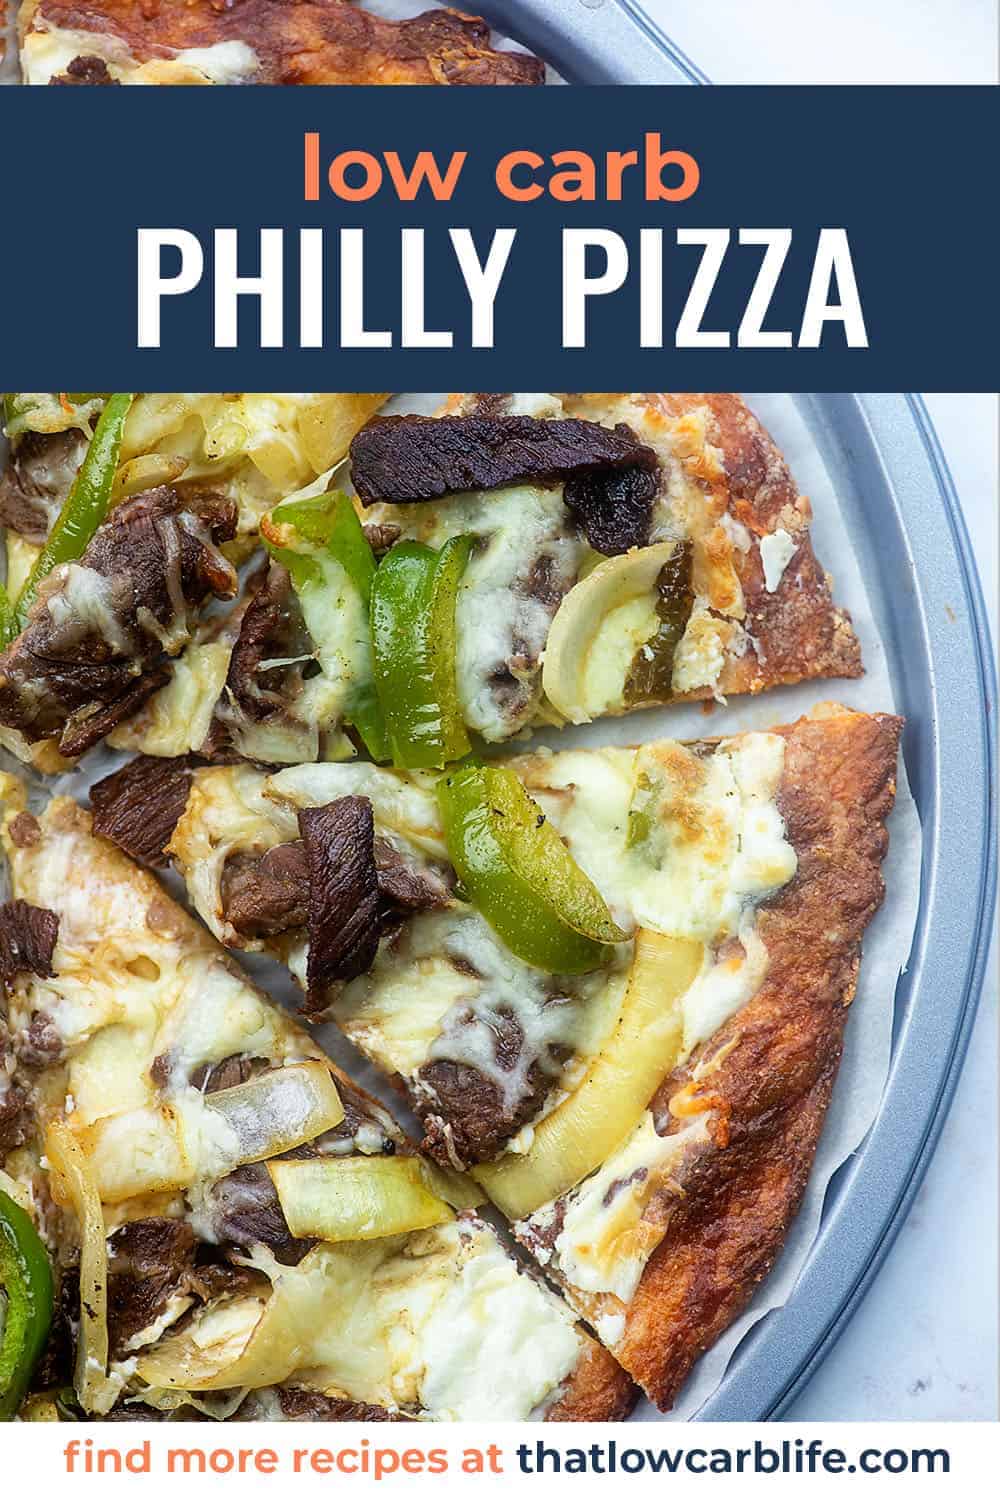 Philly cheese steak pizza recipe on pizza pan